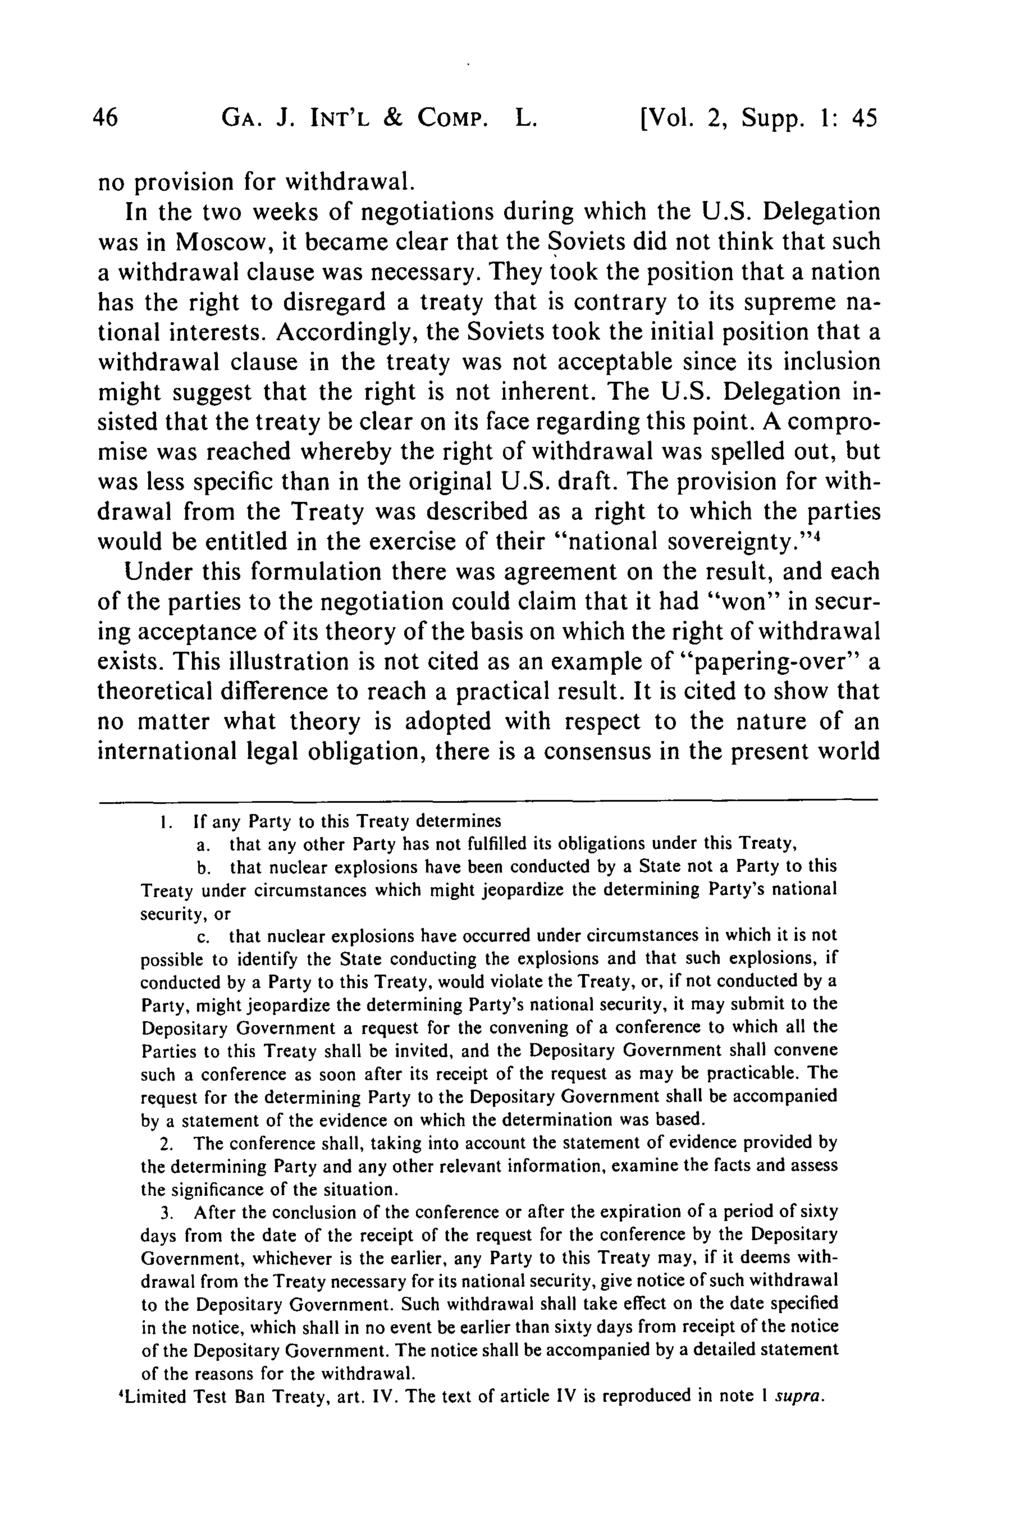 GA. J. INT'L & COMP. L. [Vol. 2, Supp. 1: 45 no provision for withdrawal. In the two weeks of negotiations during which the U.S. Delegation was in Moscow, it became clear that the Soviets did not think that such a withdrawal clause was necessary.